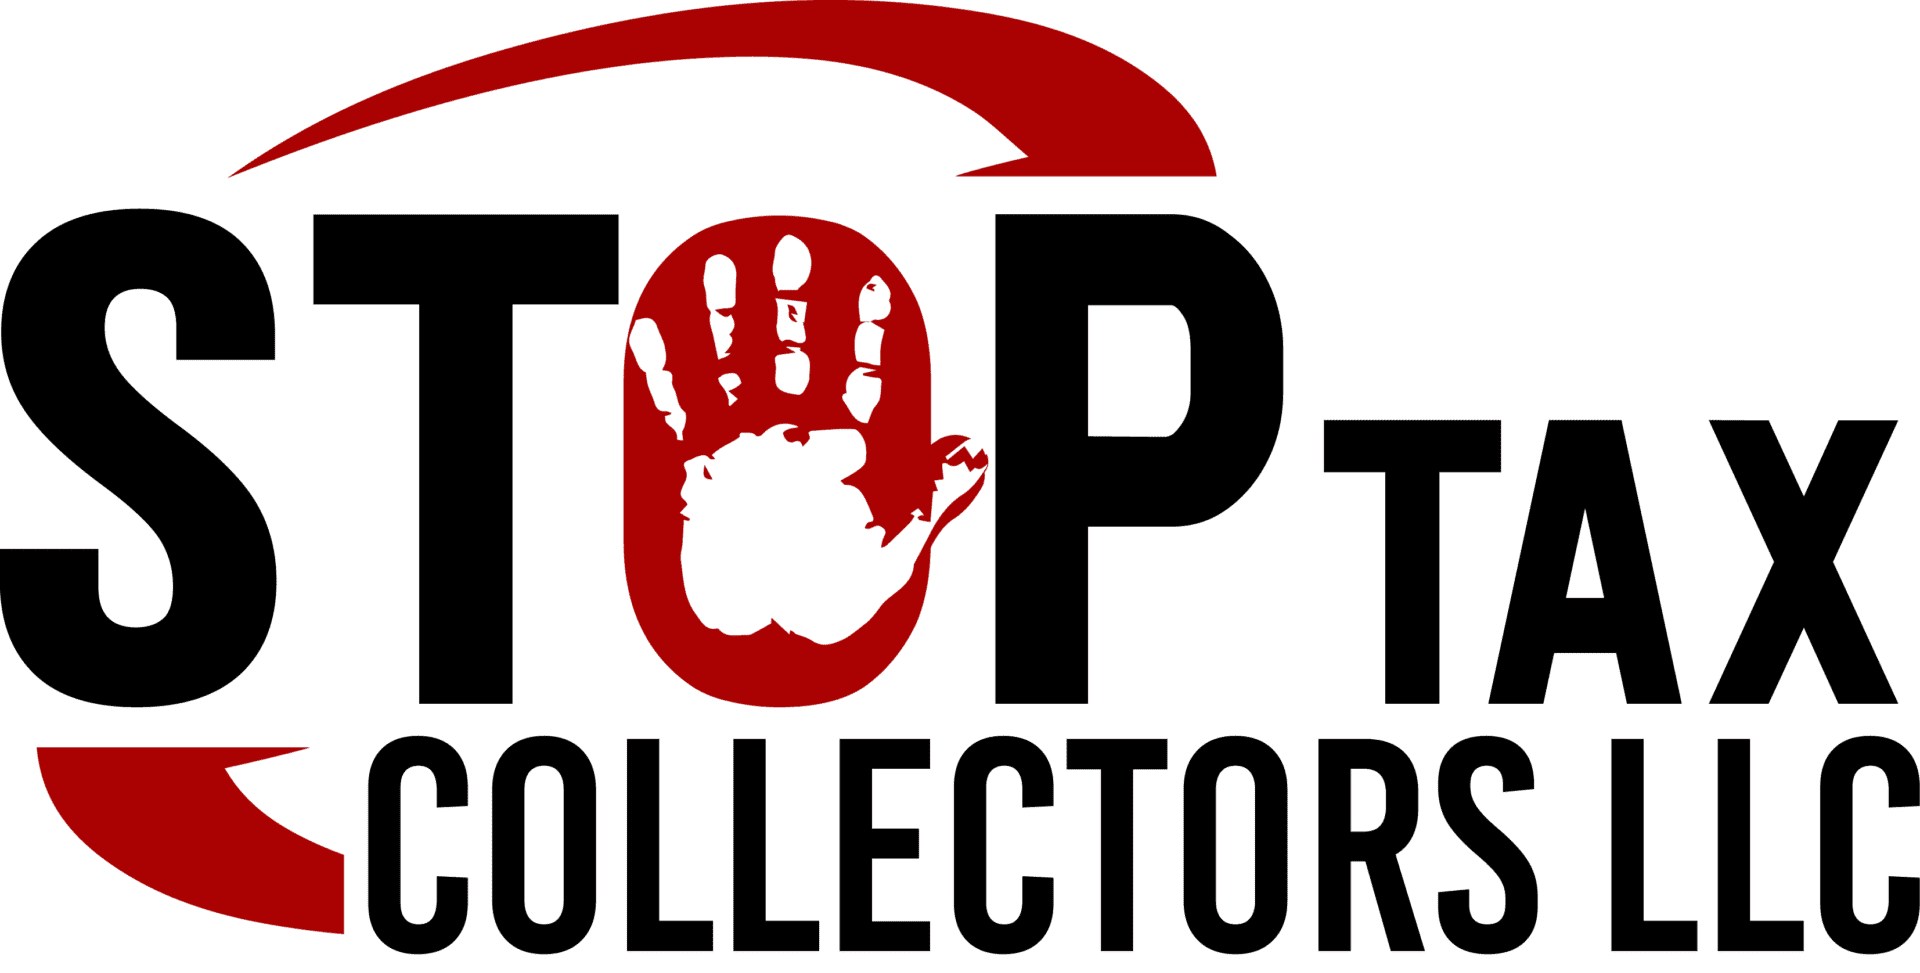 stop-collection-without-title